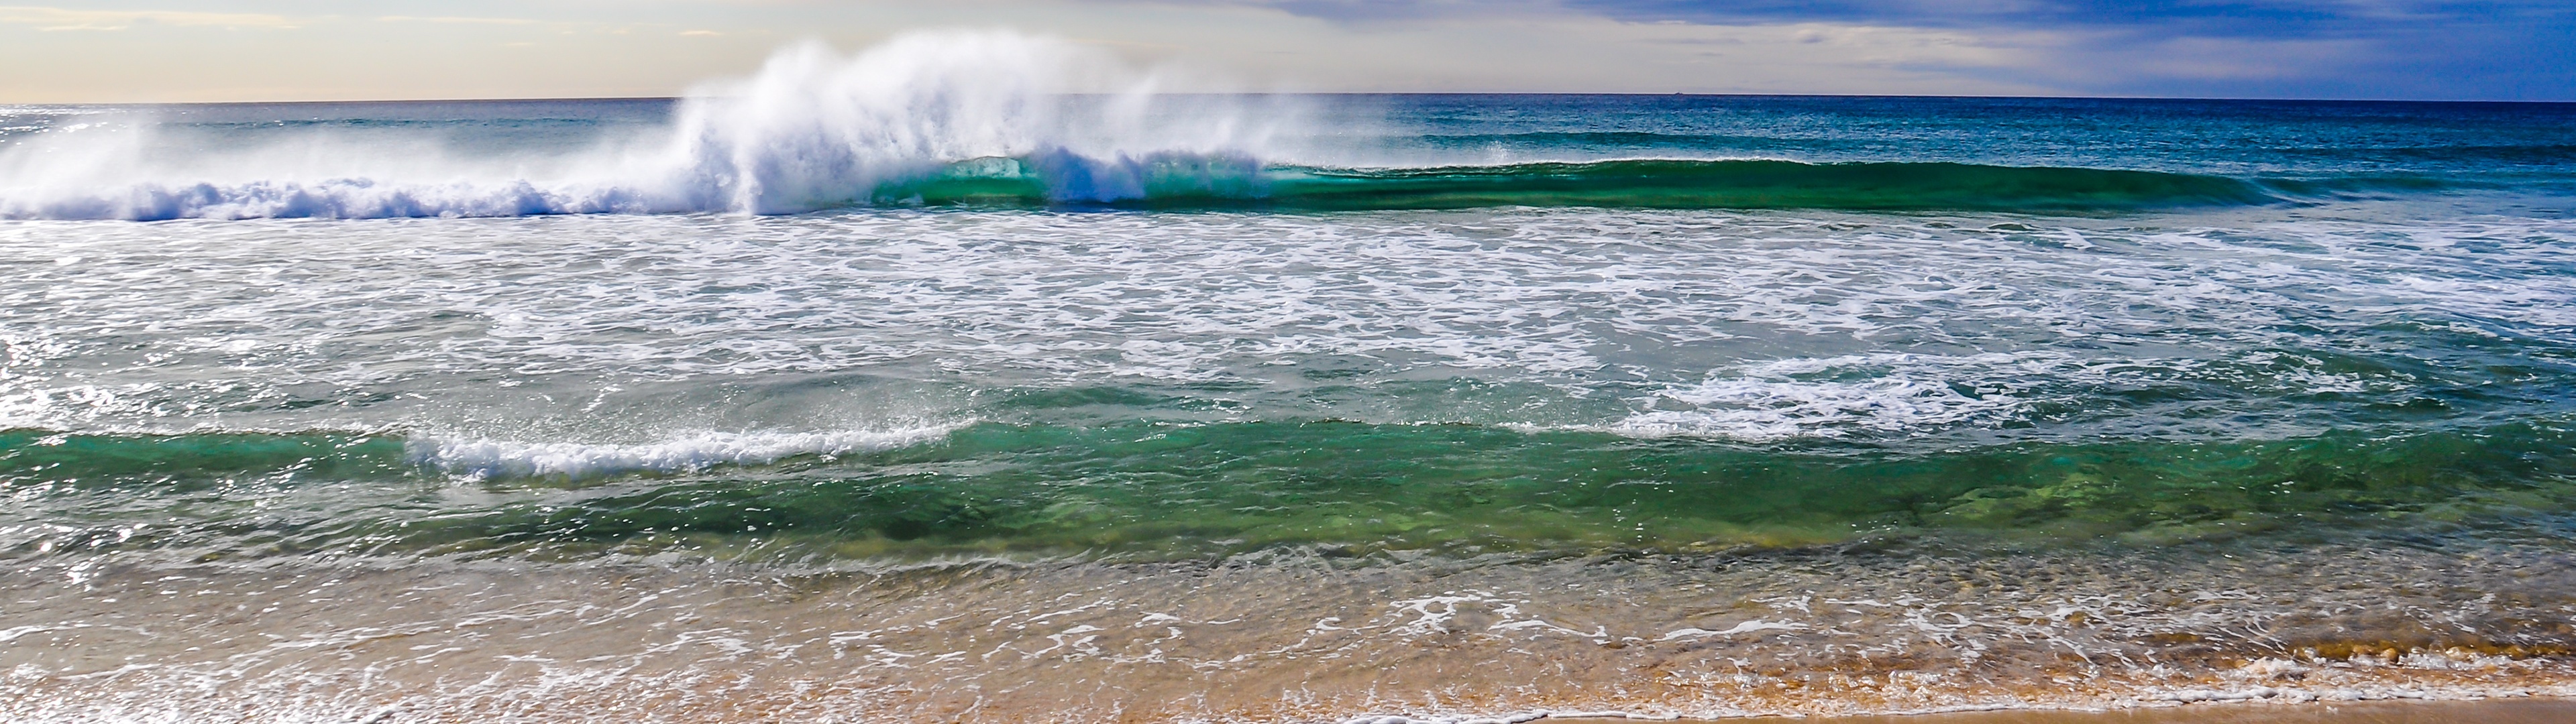 Seascape: Coastal waters, Small waves, A good place for surfing, The ocean beach. 3840x1080 Dual Screen Background.